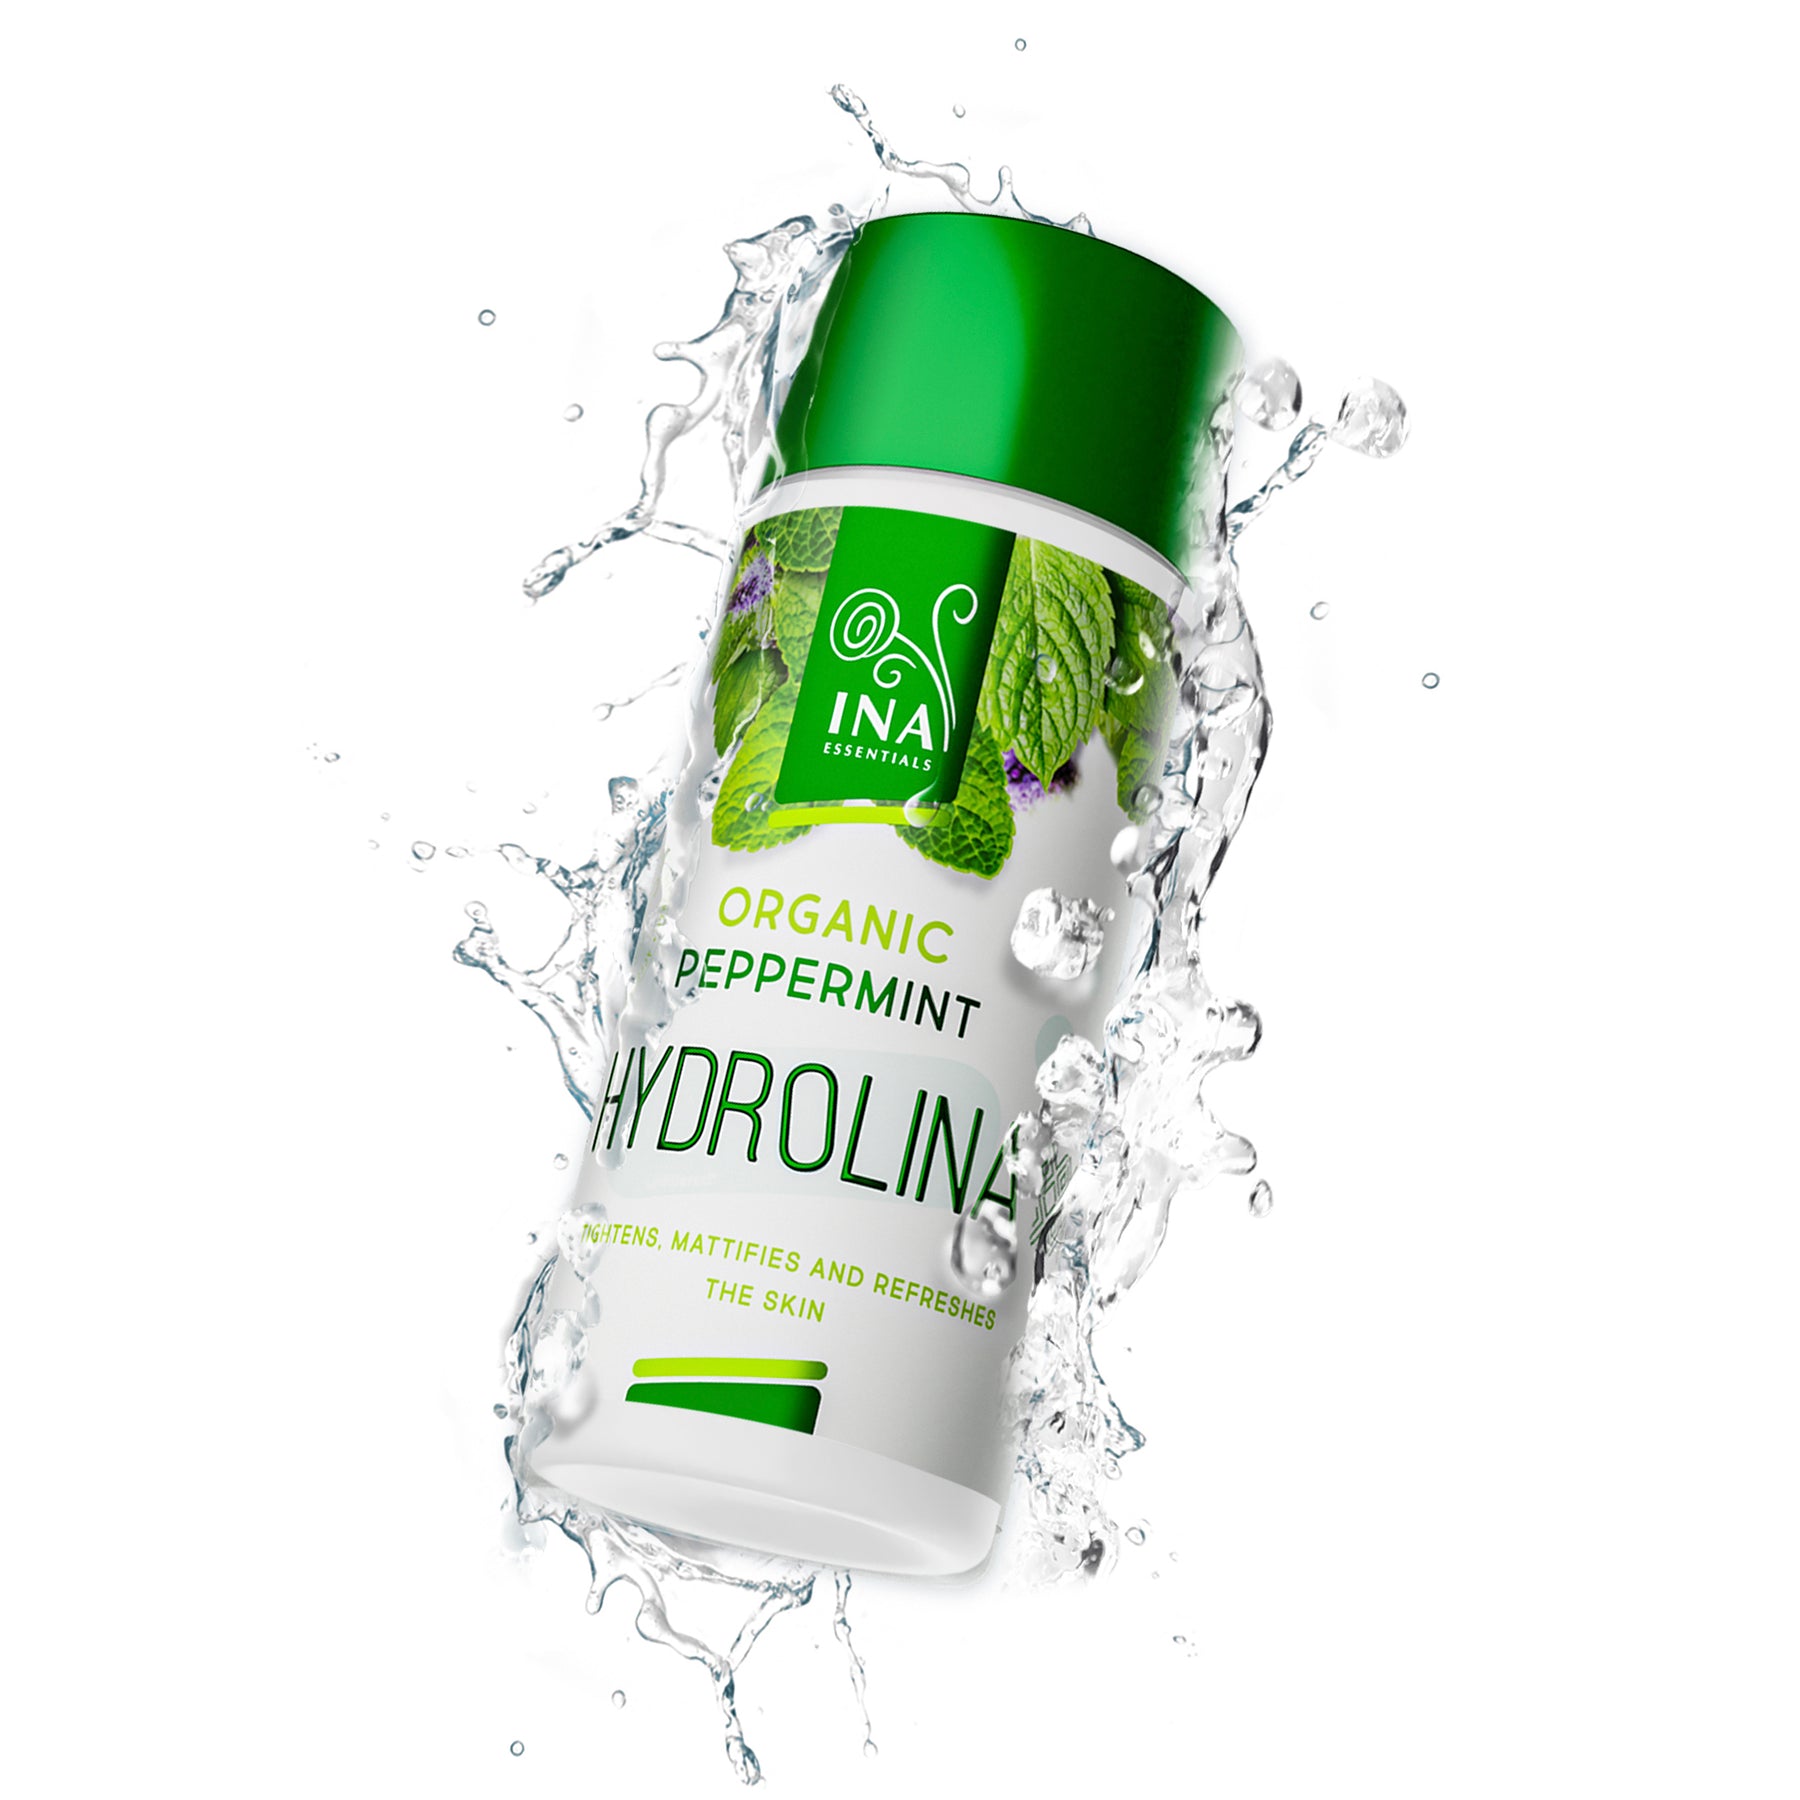 Organic Peppermint Water - Hydrolina for tight skin and Matte effect